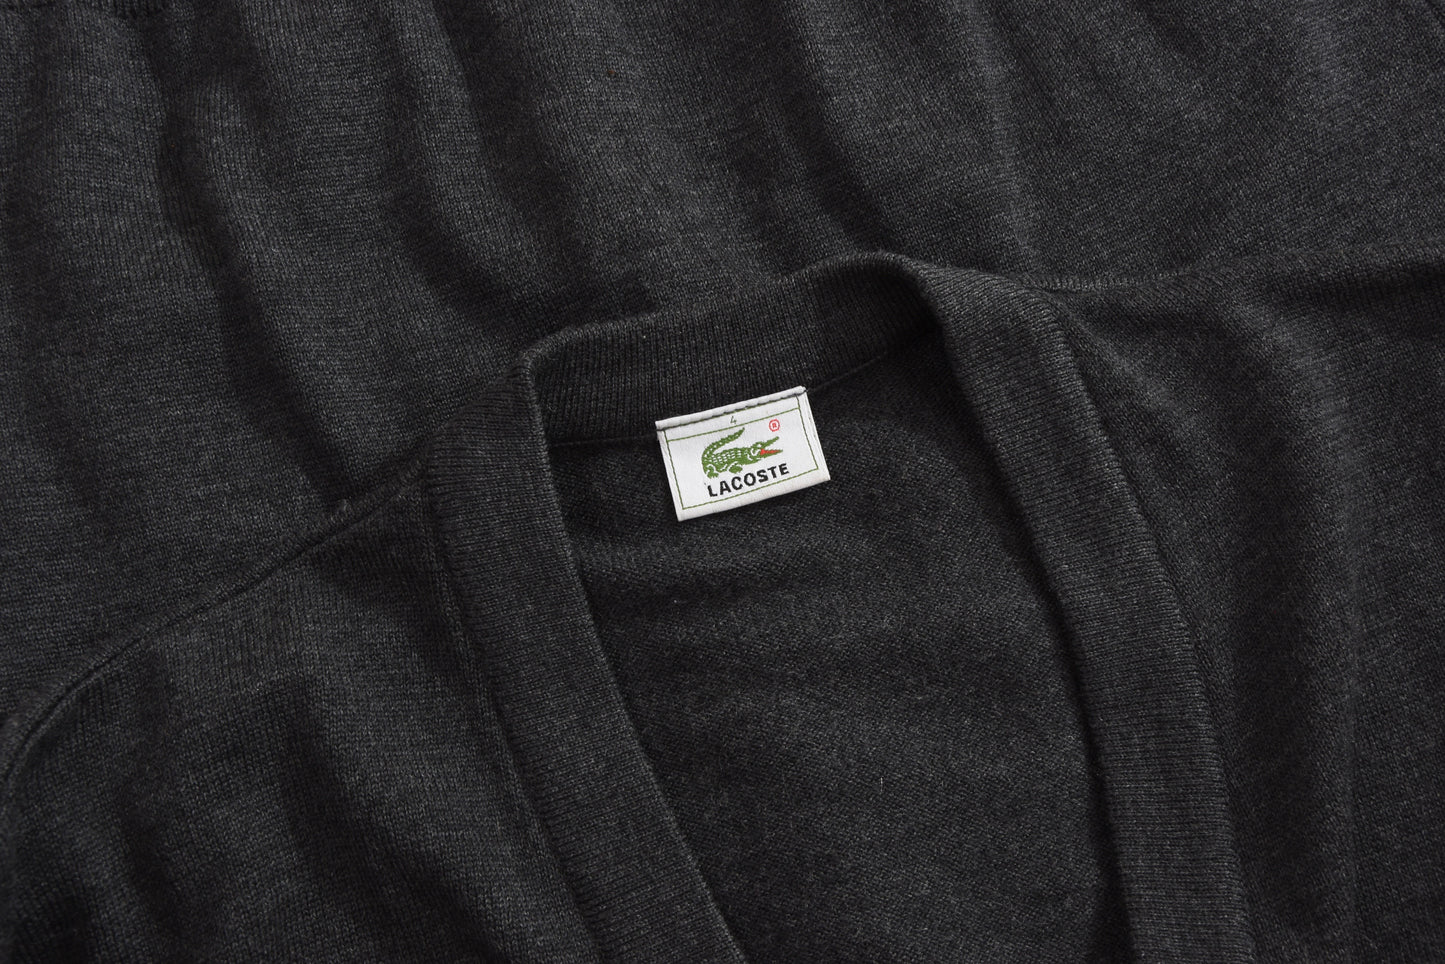 Lacoste Wool Cardigan Sweater Size 4 - Charcoal